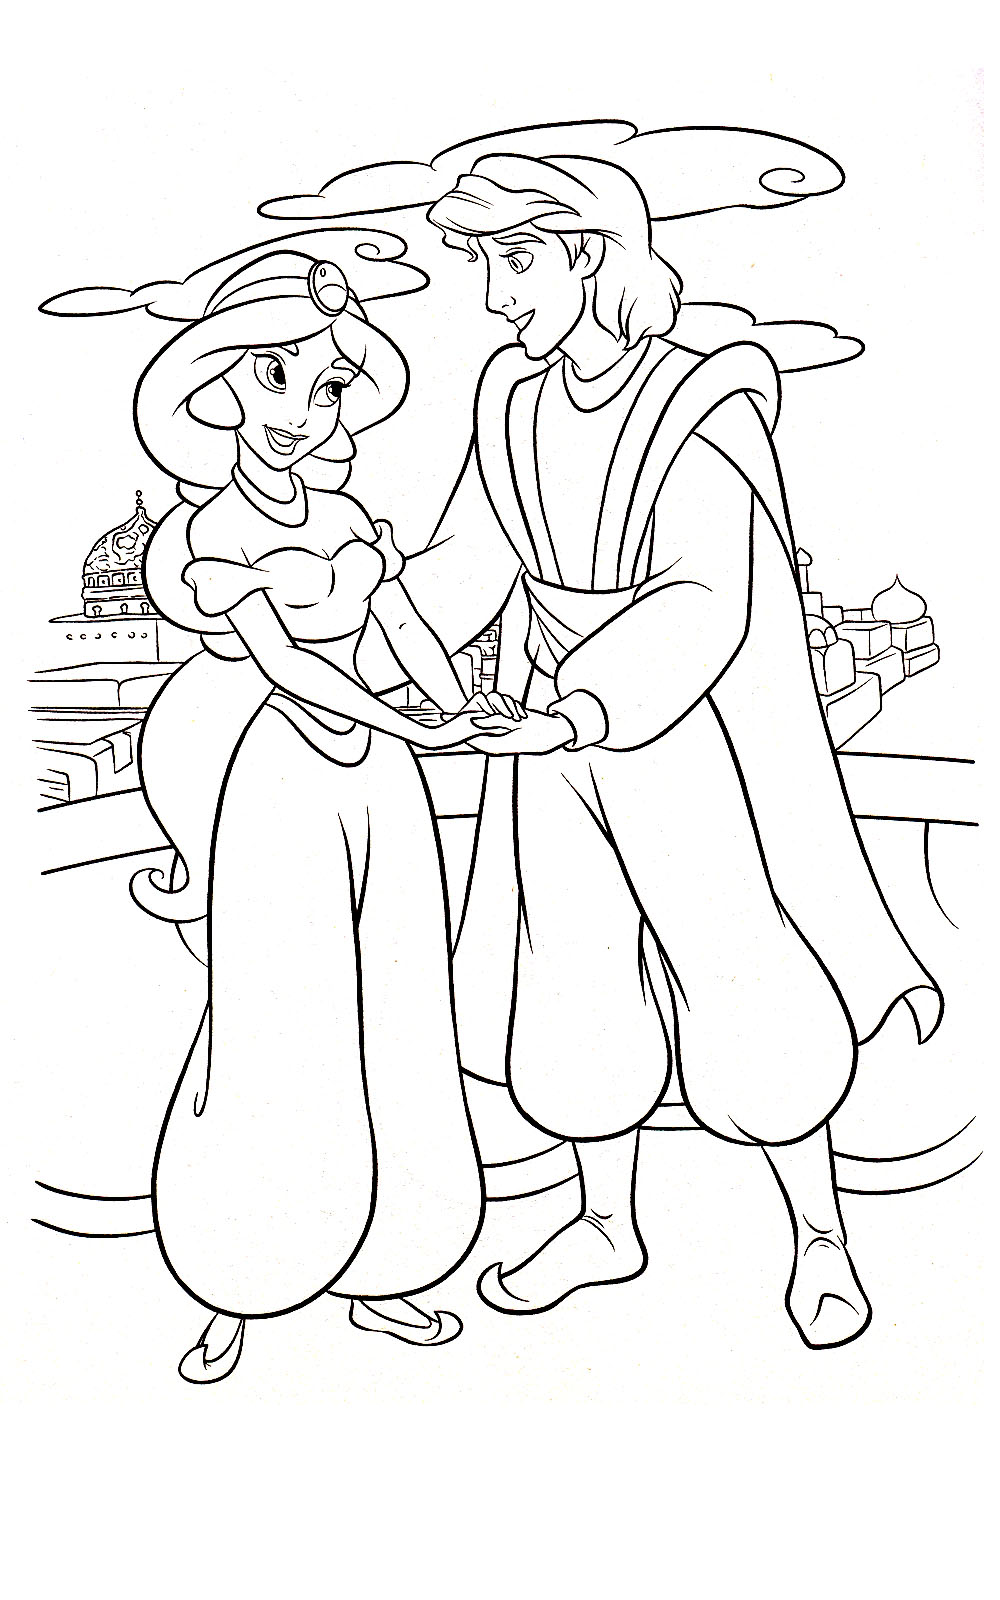 Aladdin-Coloring-Pages-Printable.jpg (1000×1600) | Disney coloring